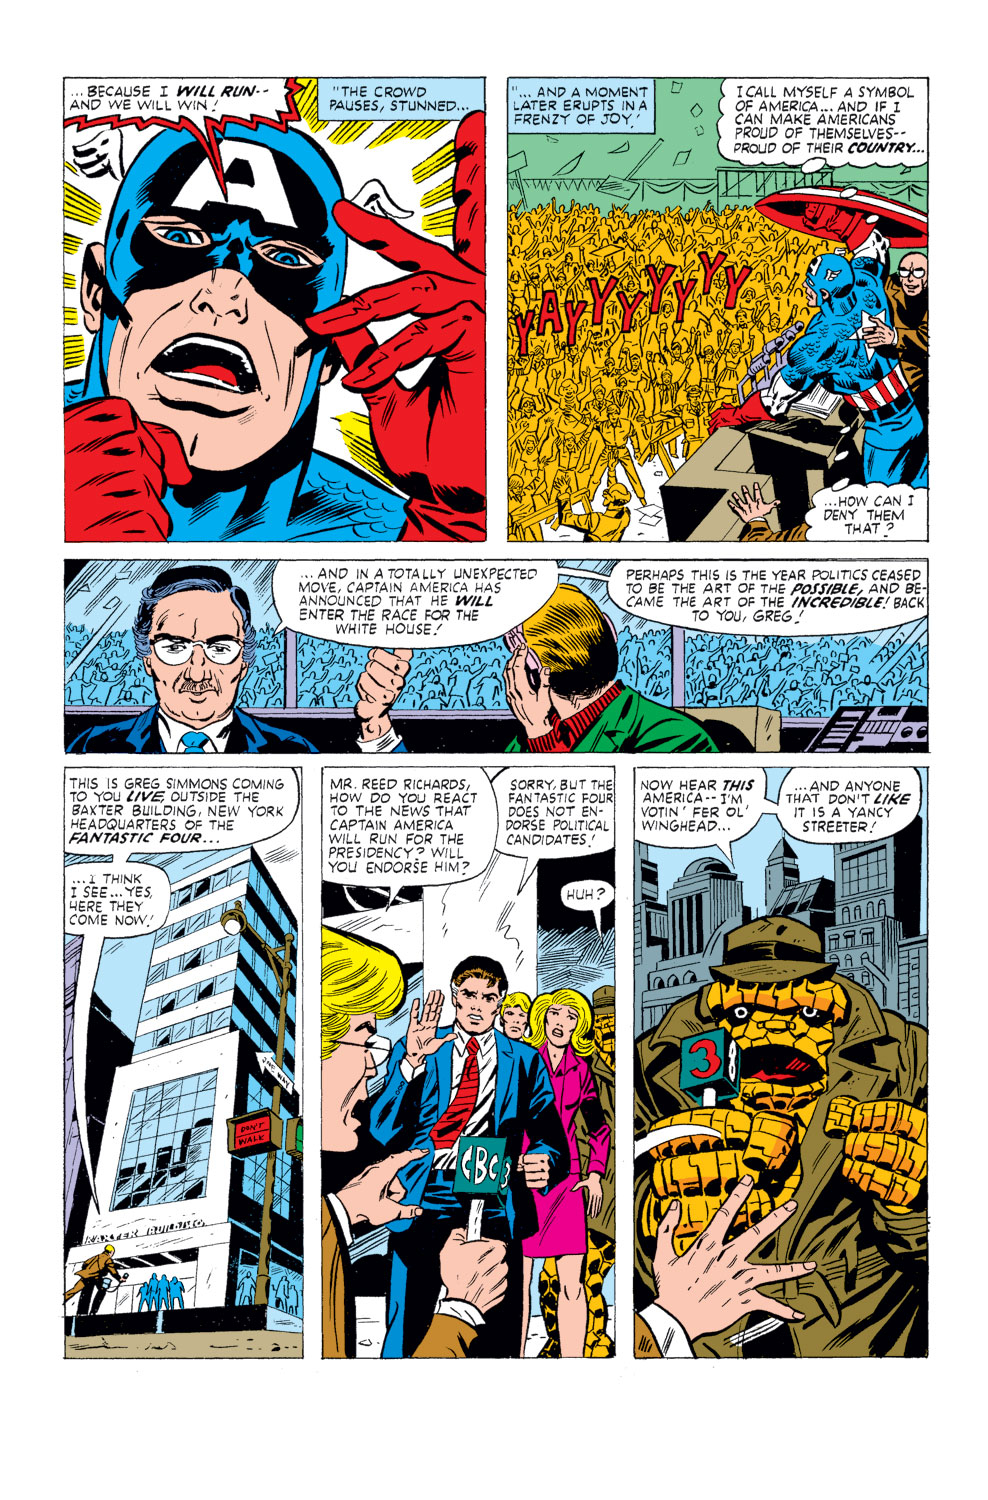 What If? (1977) issue 26 - Captain America had been elected president - Page 4